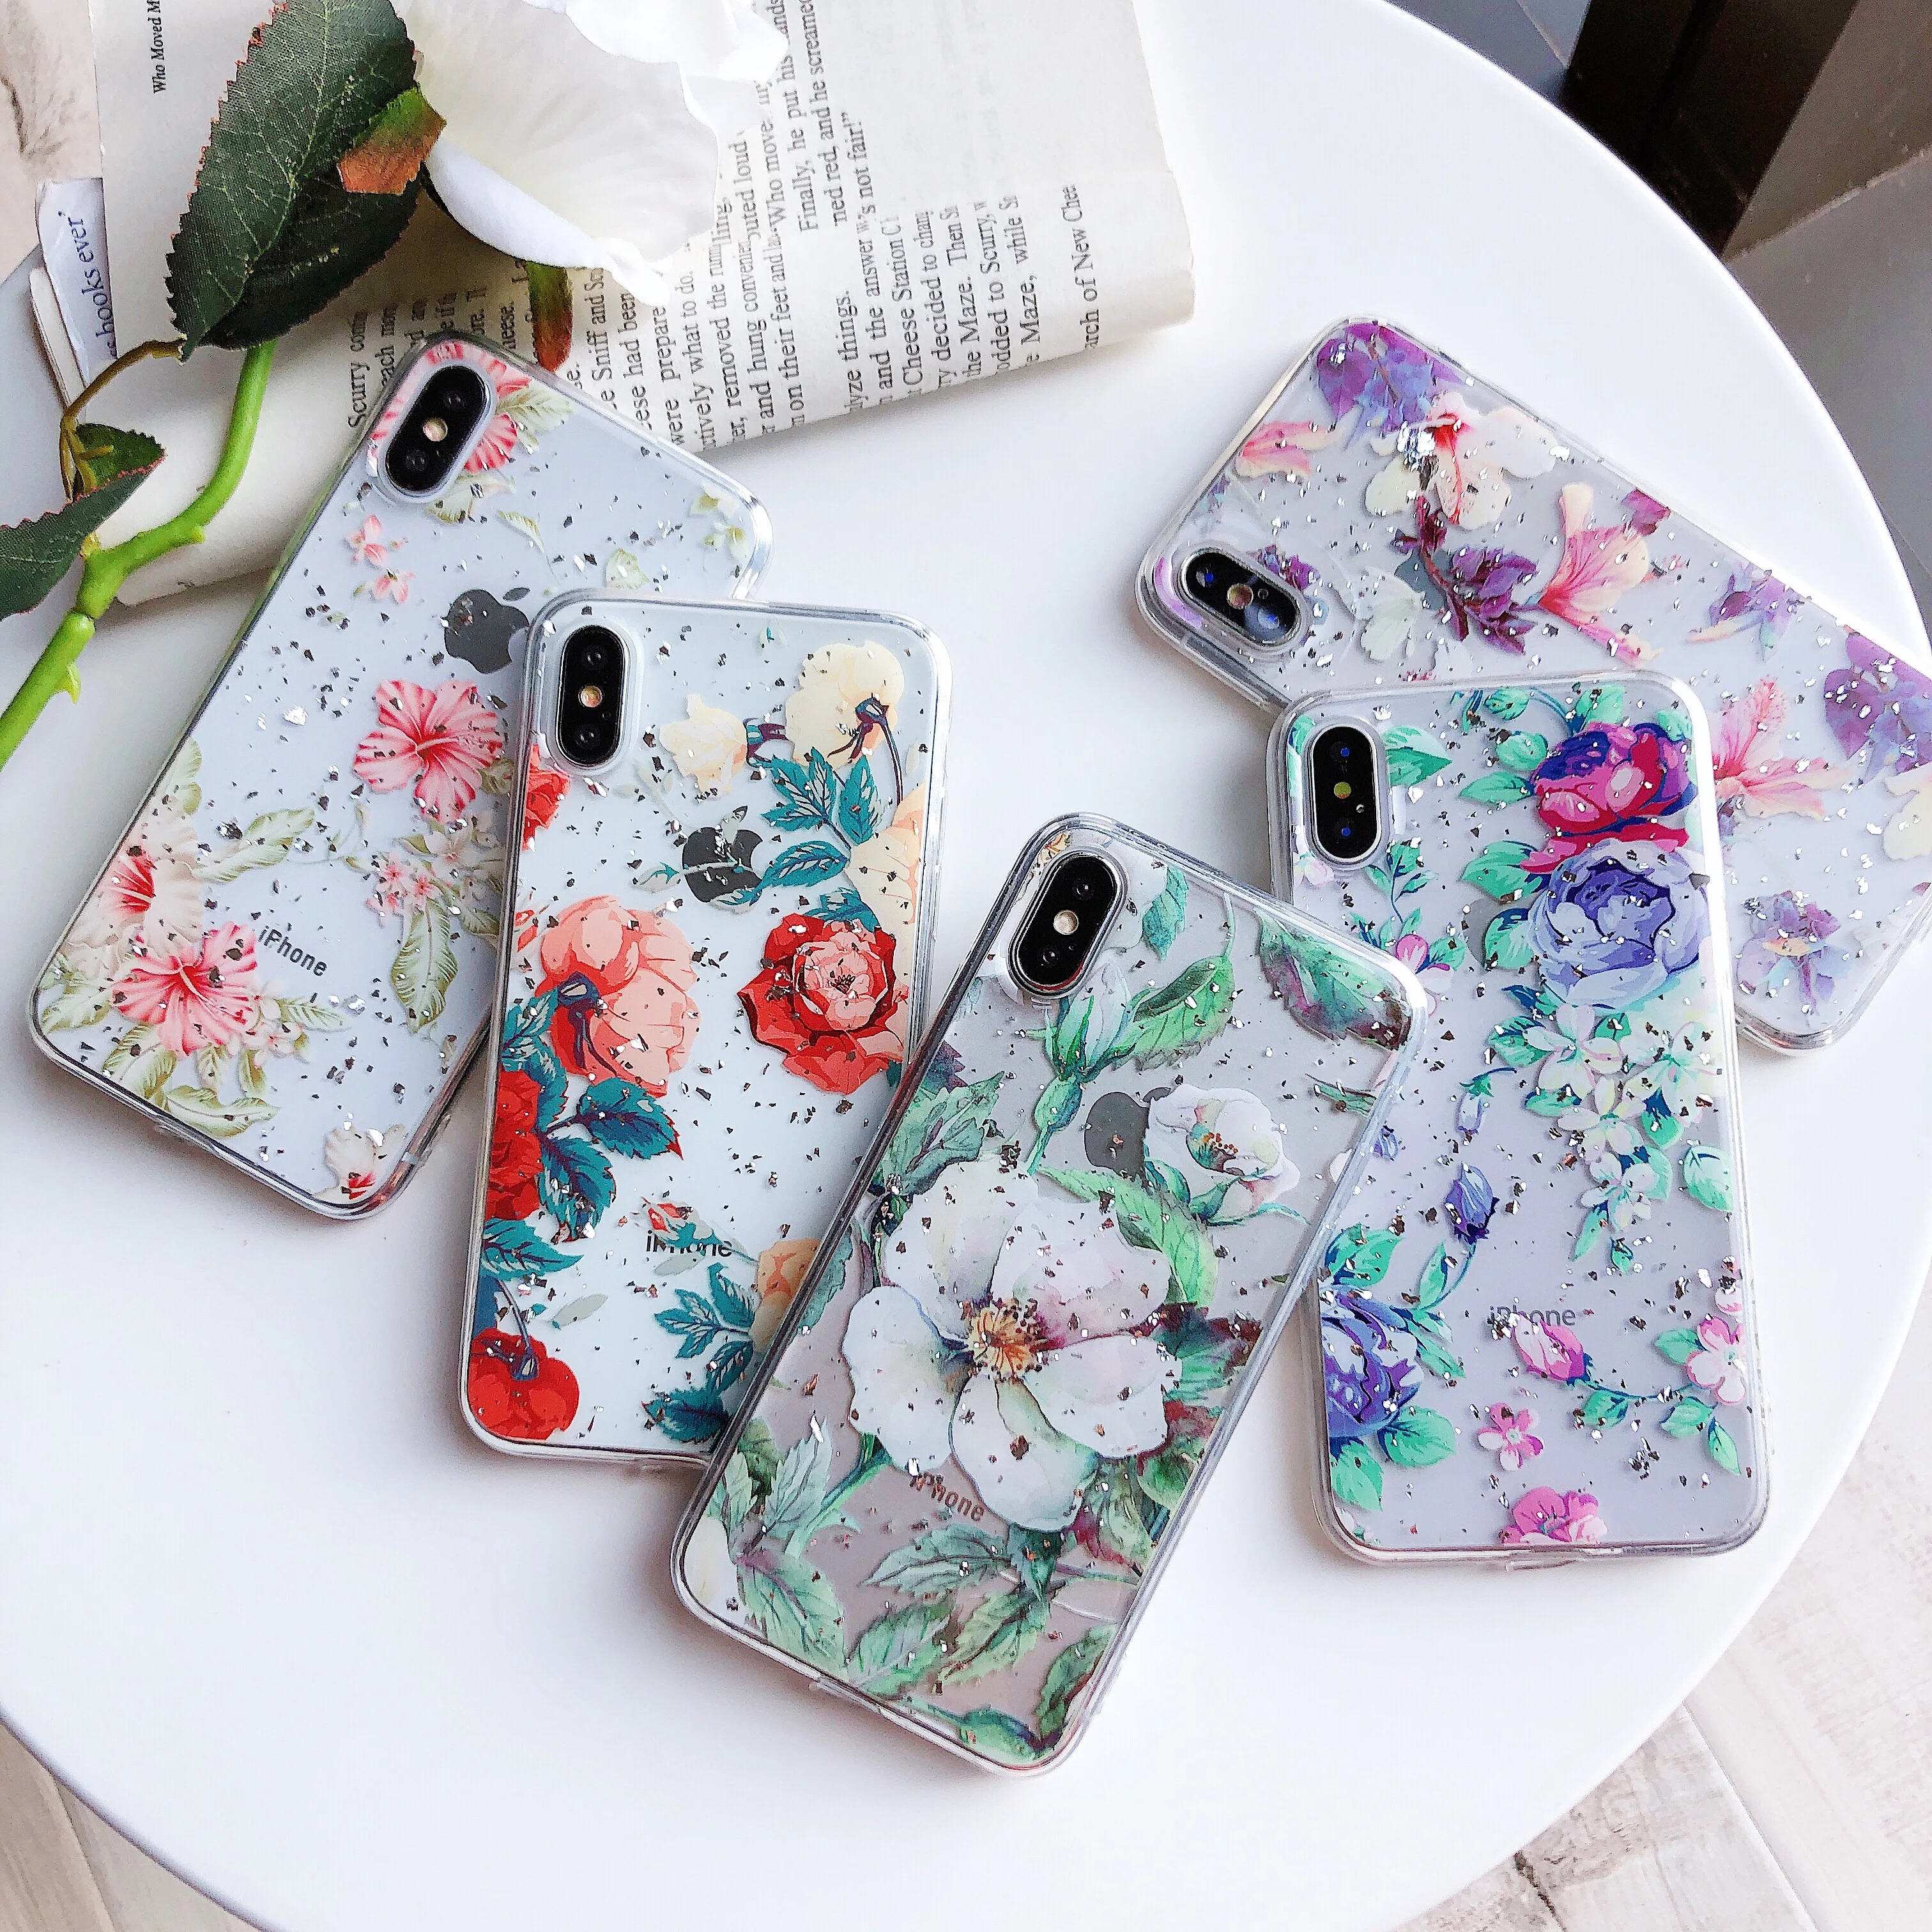 

USLION Glitter Epoxy Gold Silver Print Rose Flower Soft Phone Case for iphone X XR XS MAX 6 7 8 Plus